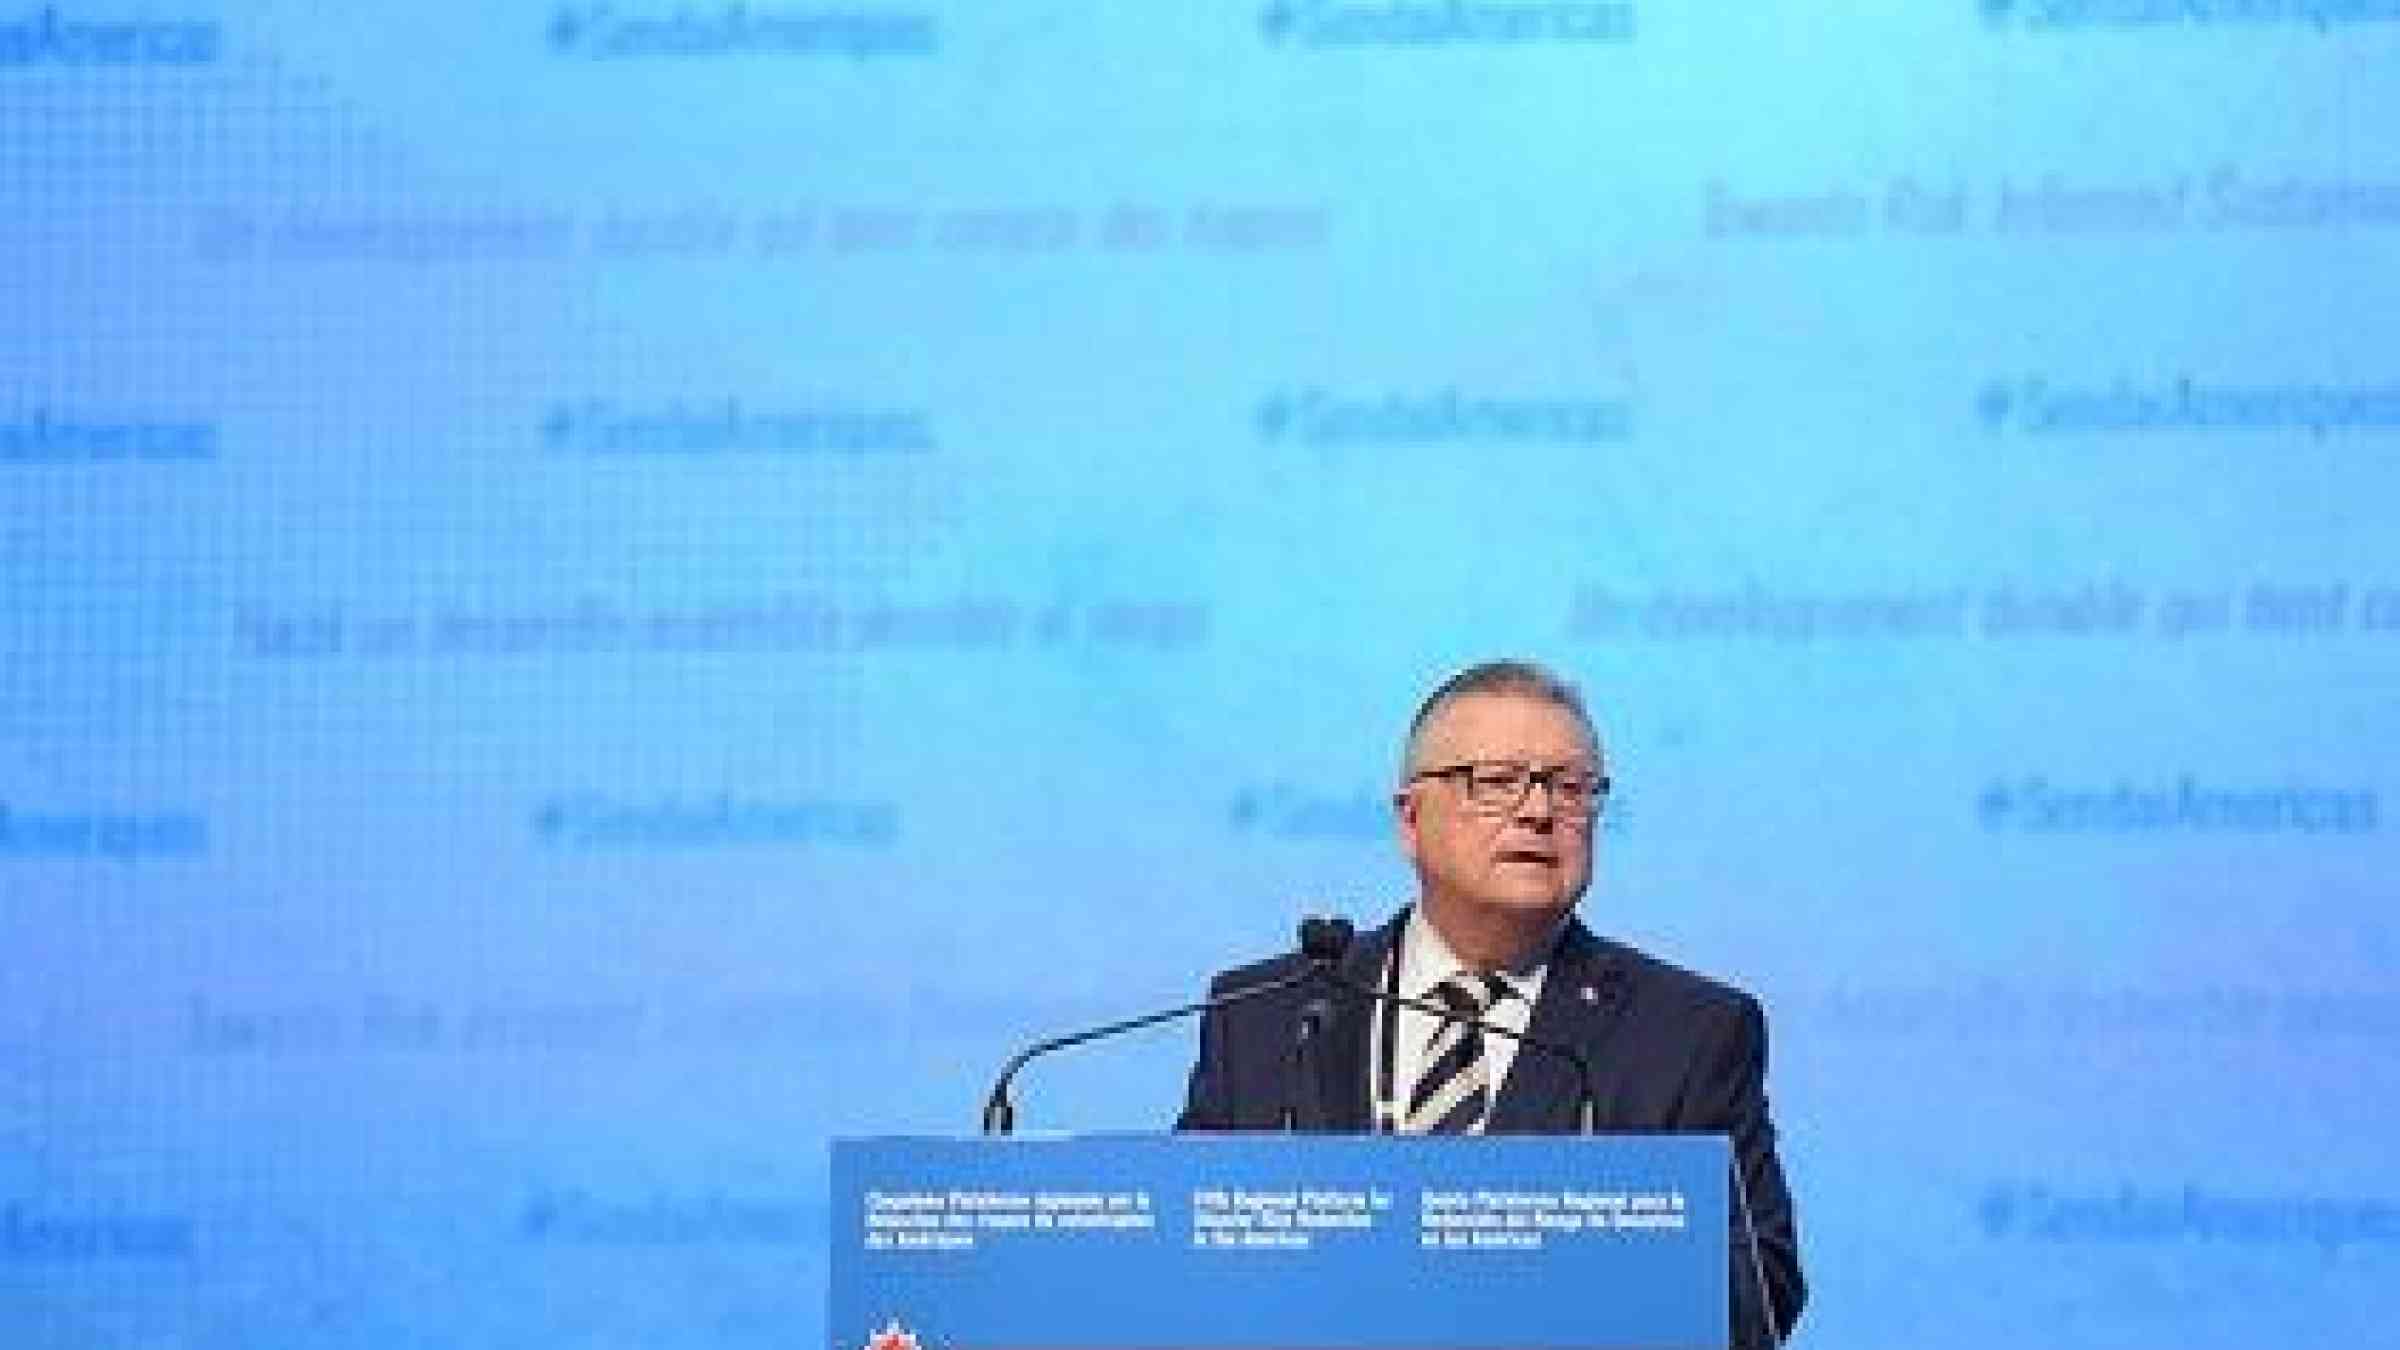 Mr. Ralph Goodale, Canada’s Minister of Public Safety and Emergency Preparedness, said the 5th Regional Platform for Disaster Risk Reduction in the Americas is set to endorse a "robust" plan for curbing the risks posed by natural and human-induced hazards (Photo: Public Safety Canada/UNISDR)